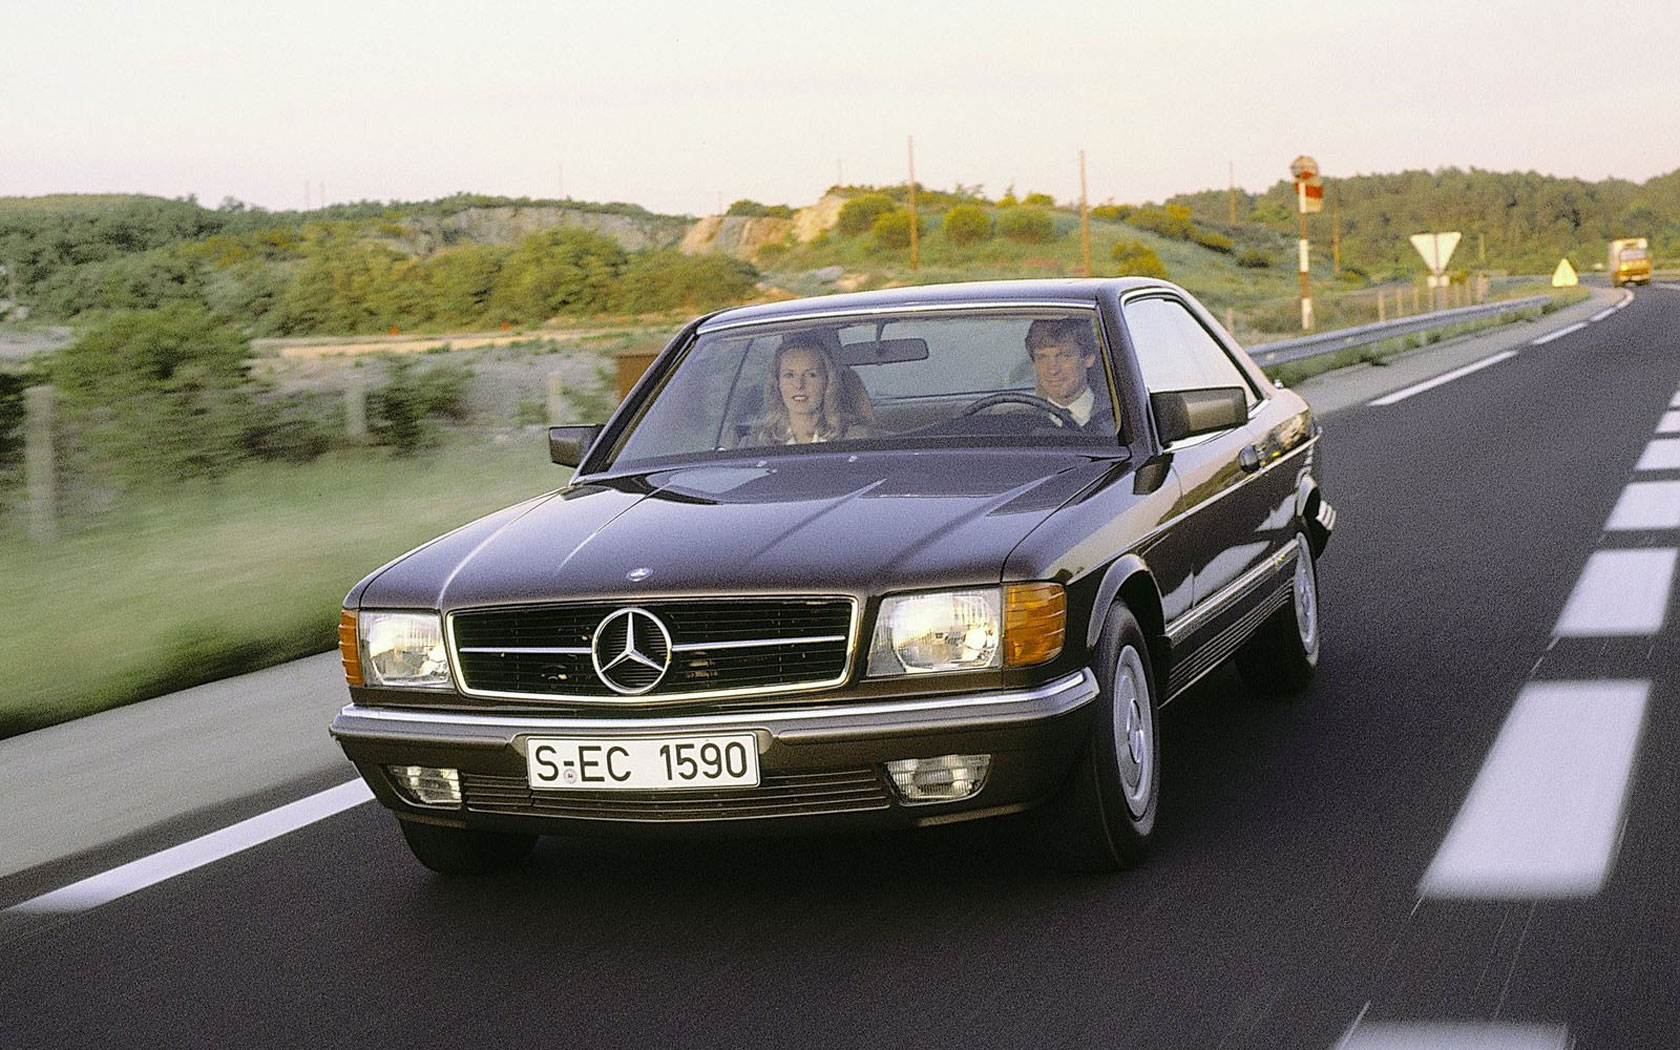  Mercedes S-Class Coupe (1981-1990)